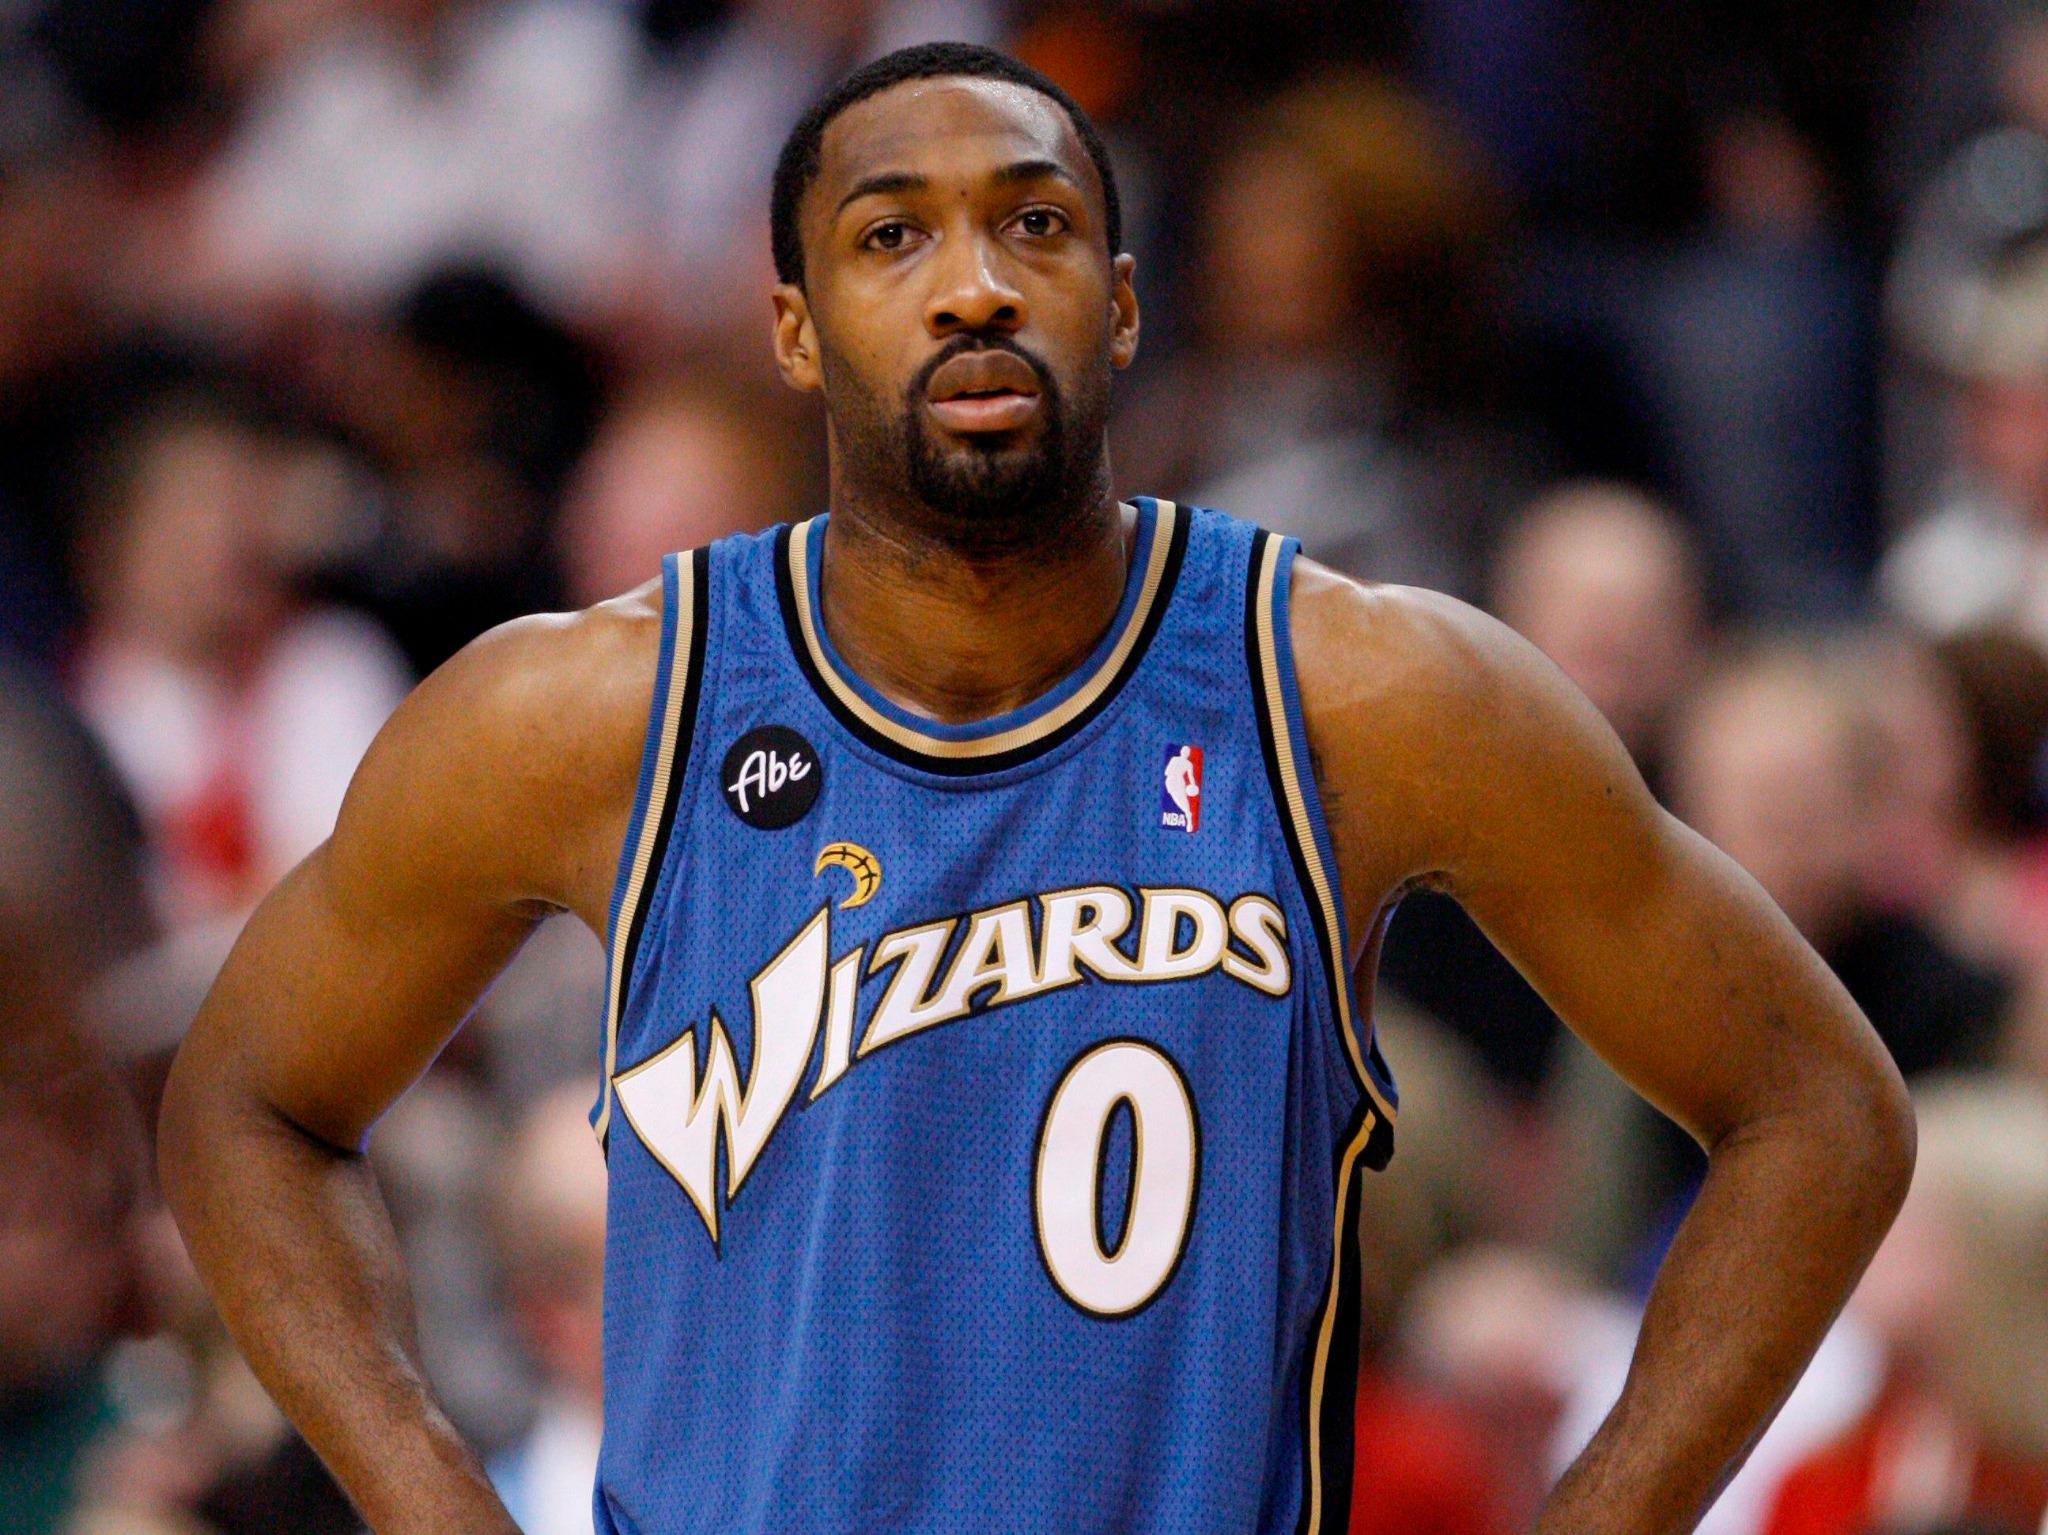 Happy Birthday to Gilbert Arenas, who turns 33 today! 